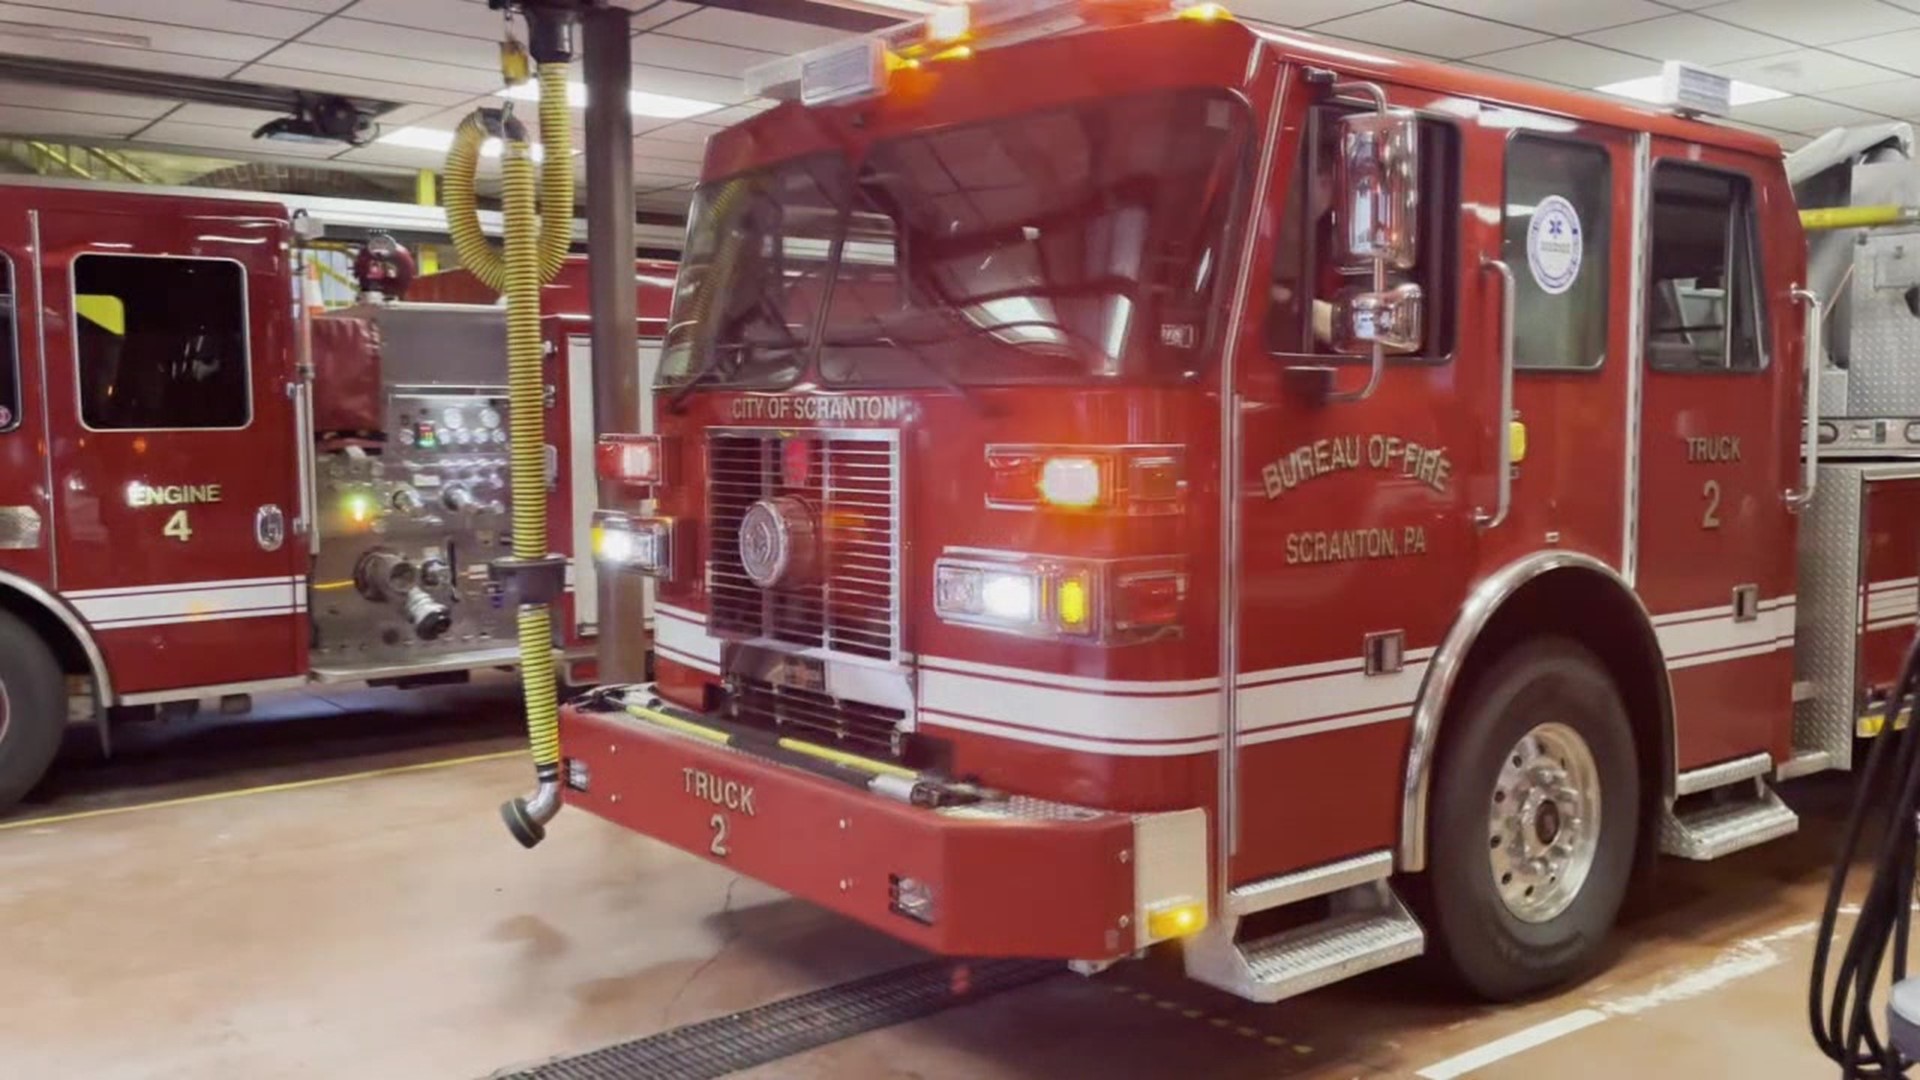 Only two months into the year, several fire departments say there's an uptick in call volume, including structure fires.